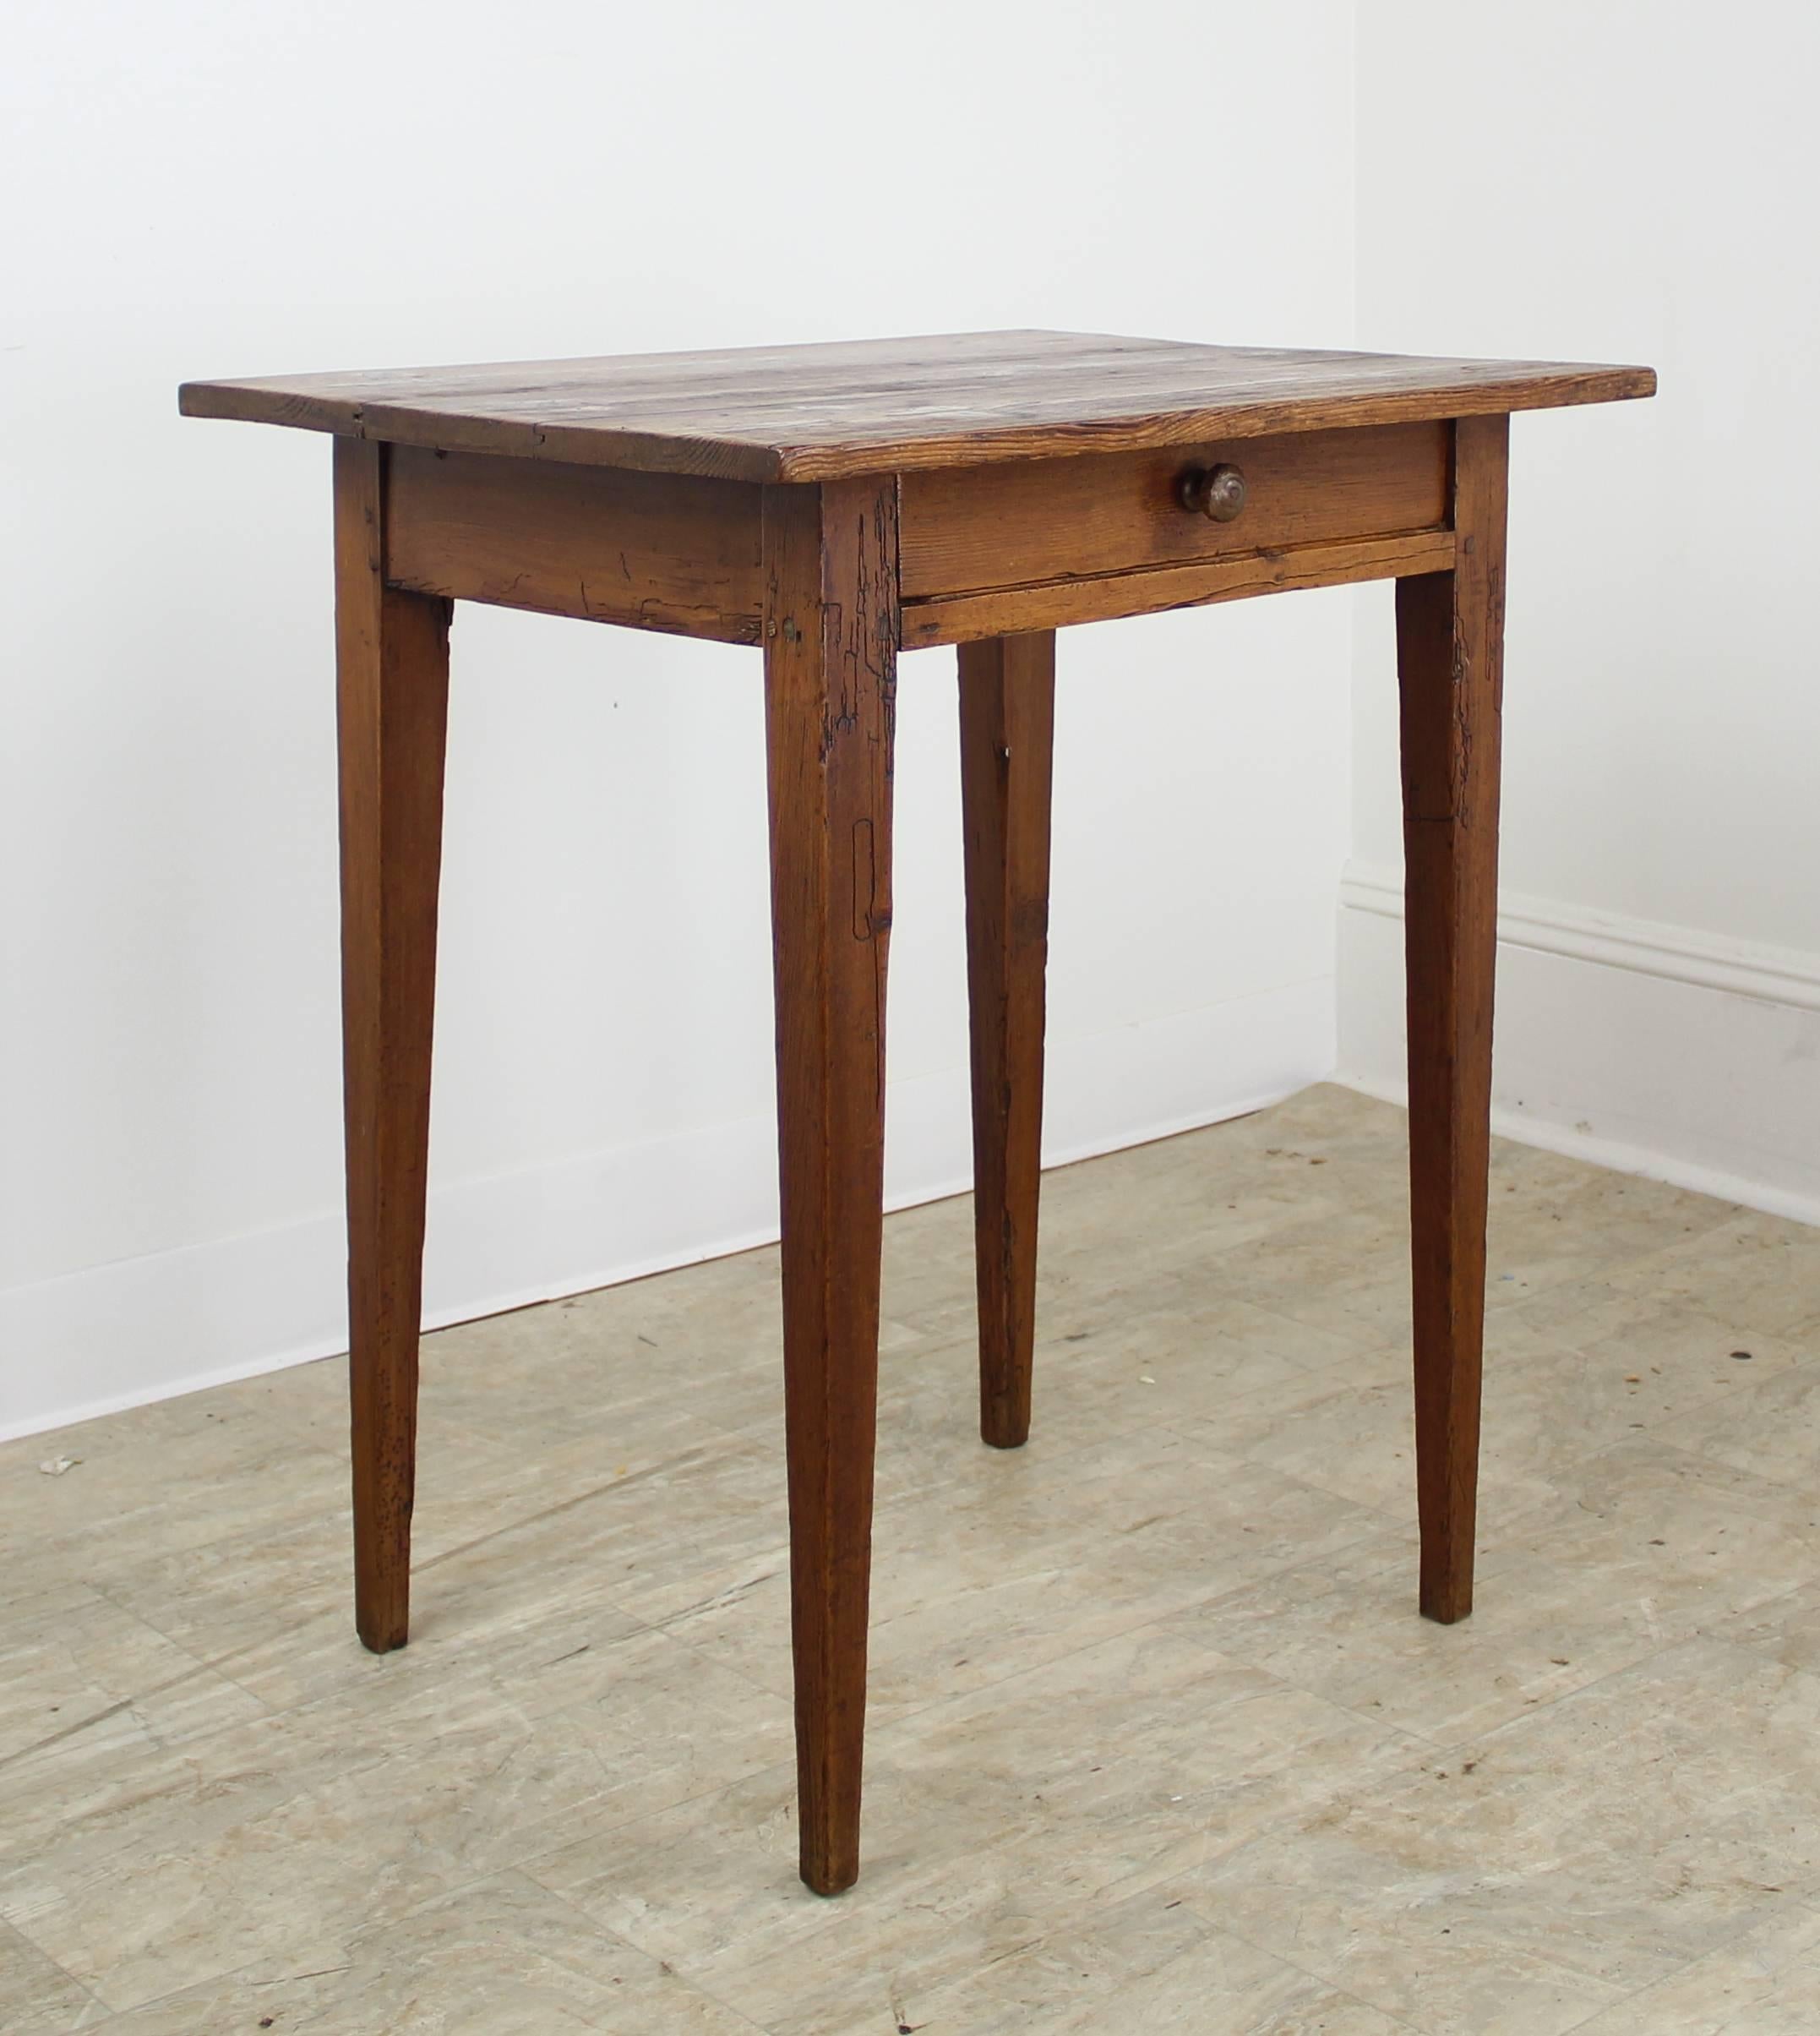 A pretty pine farm table with a charming small size, rich color and nice patina. The single center drawer and sweet tapered legs give the piece universal appeal. The top has nice interesting distress.